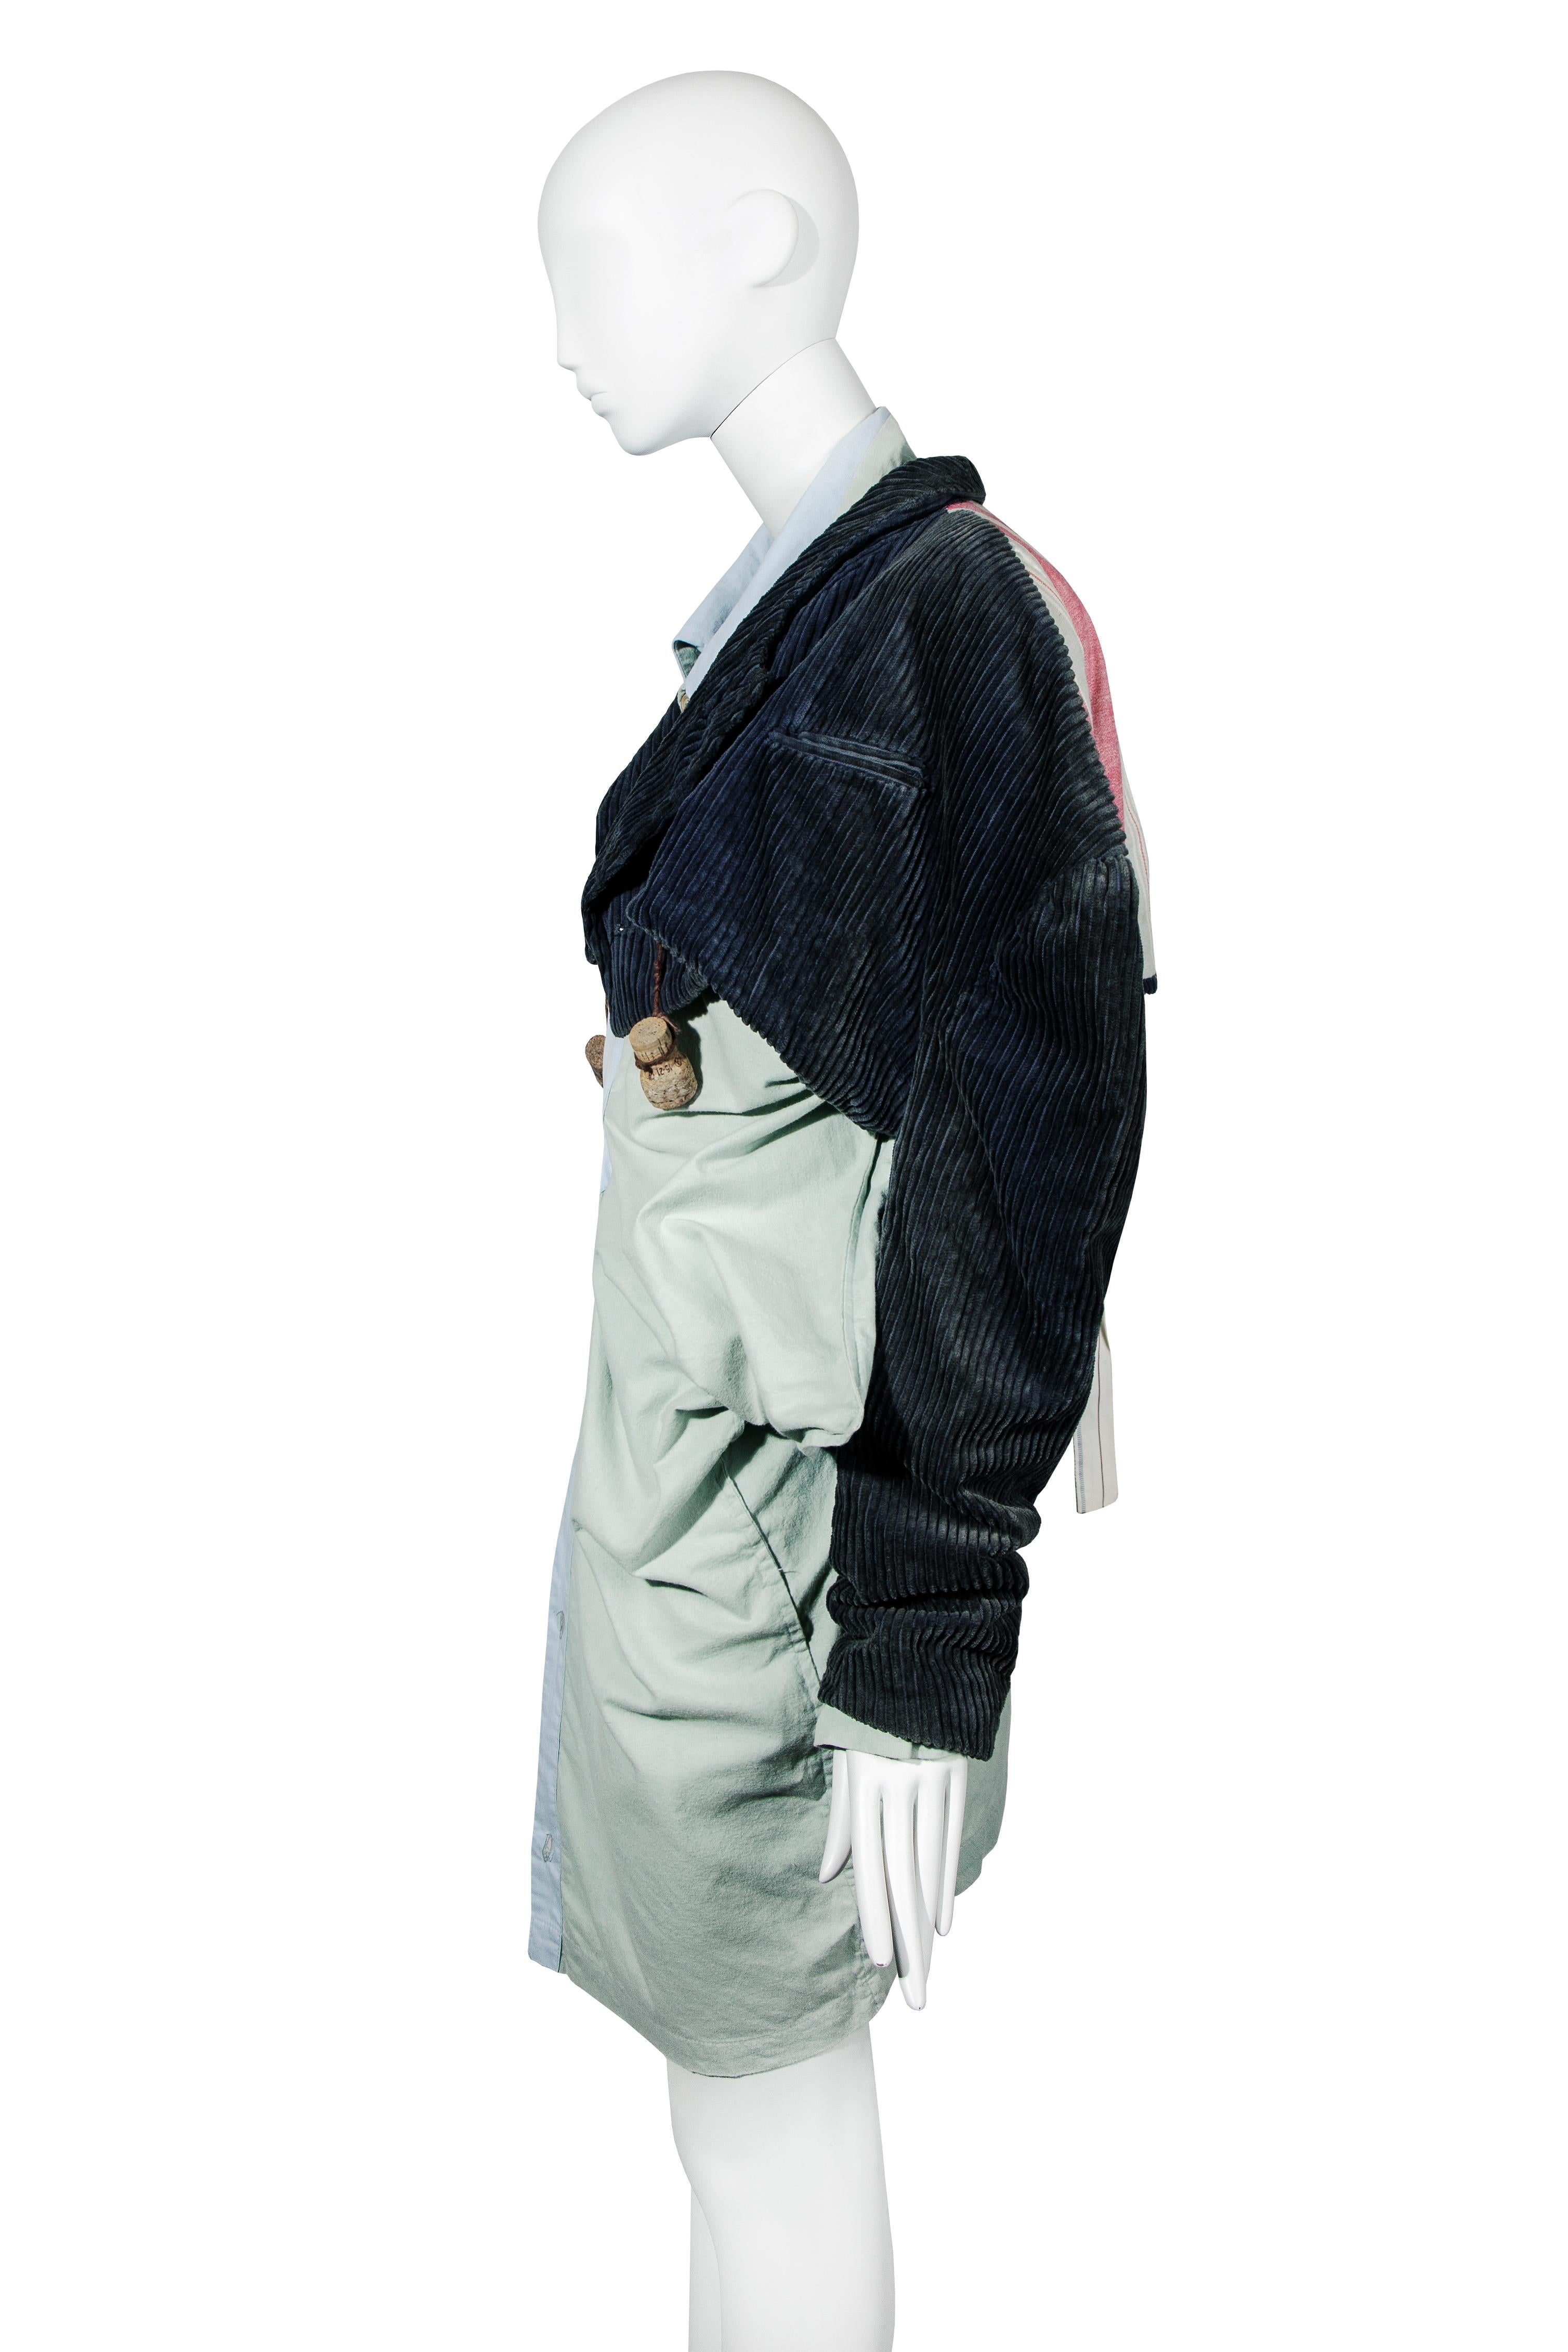 John Galliano 'The Ludic Games' spencer jacket & oversized shirt pair, fw 1985 For Sale 1